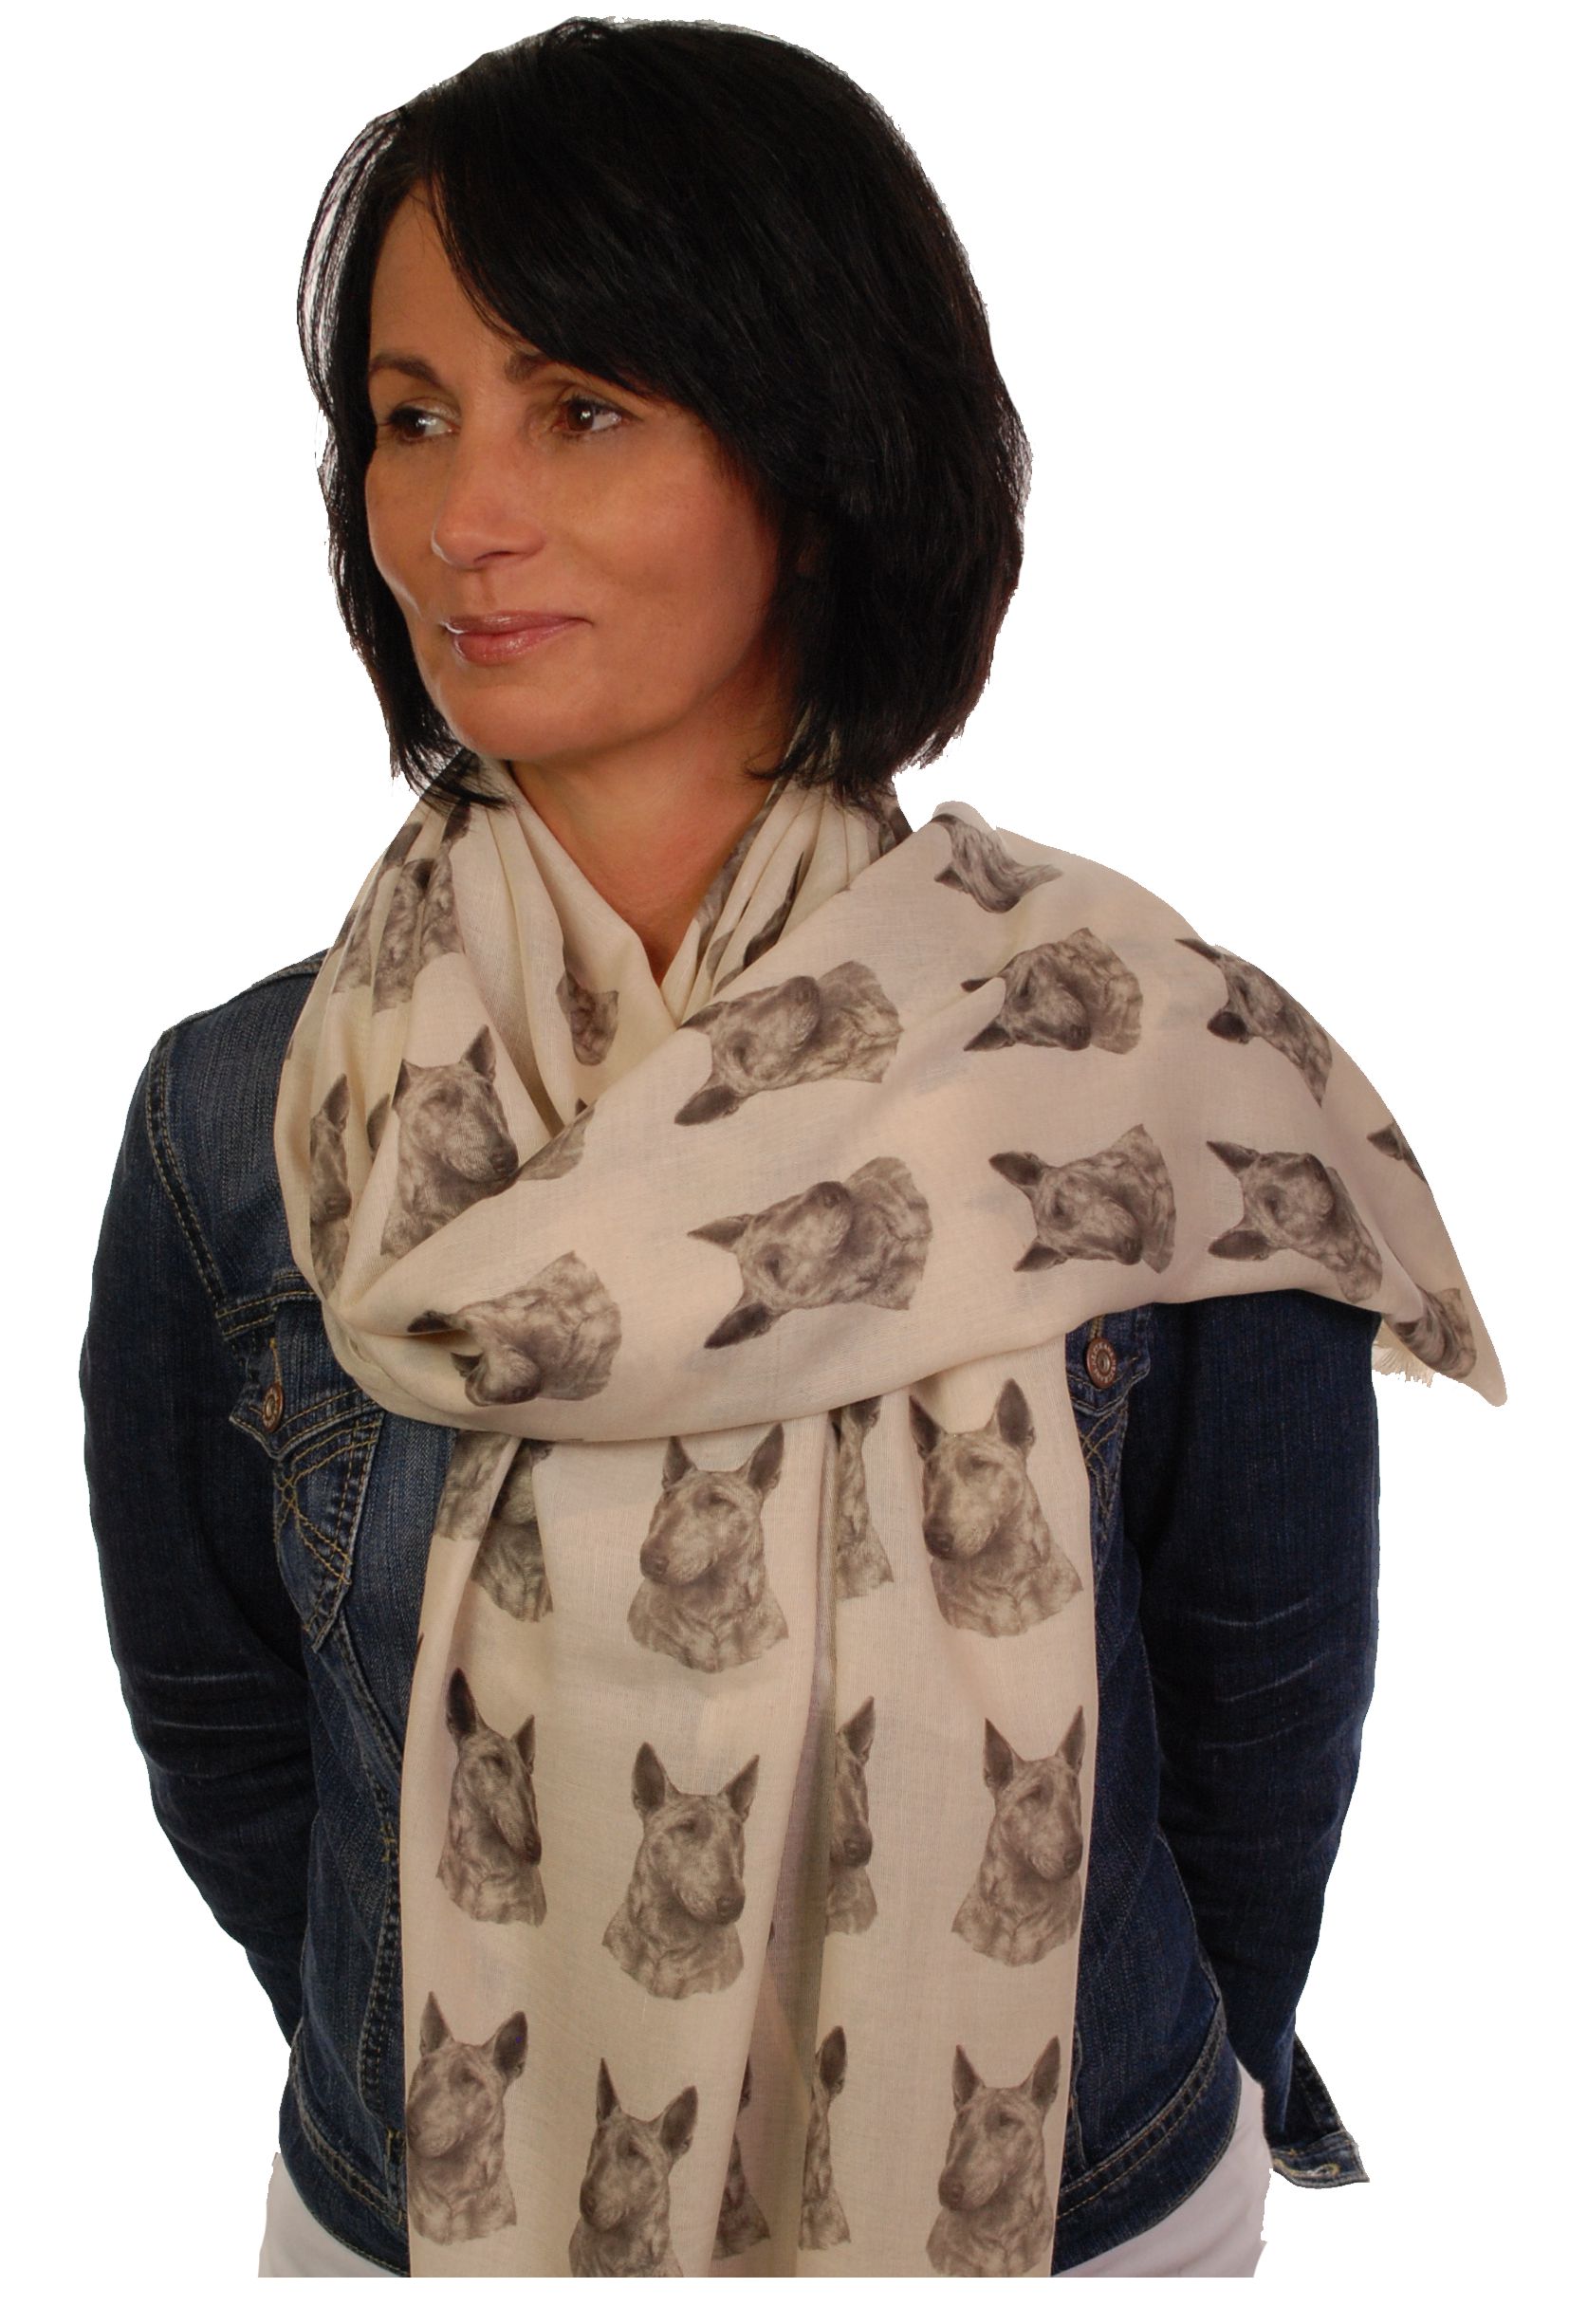 Mike Sibley Bull Terrier licensed design ladies fashion scarf